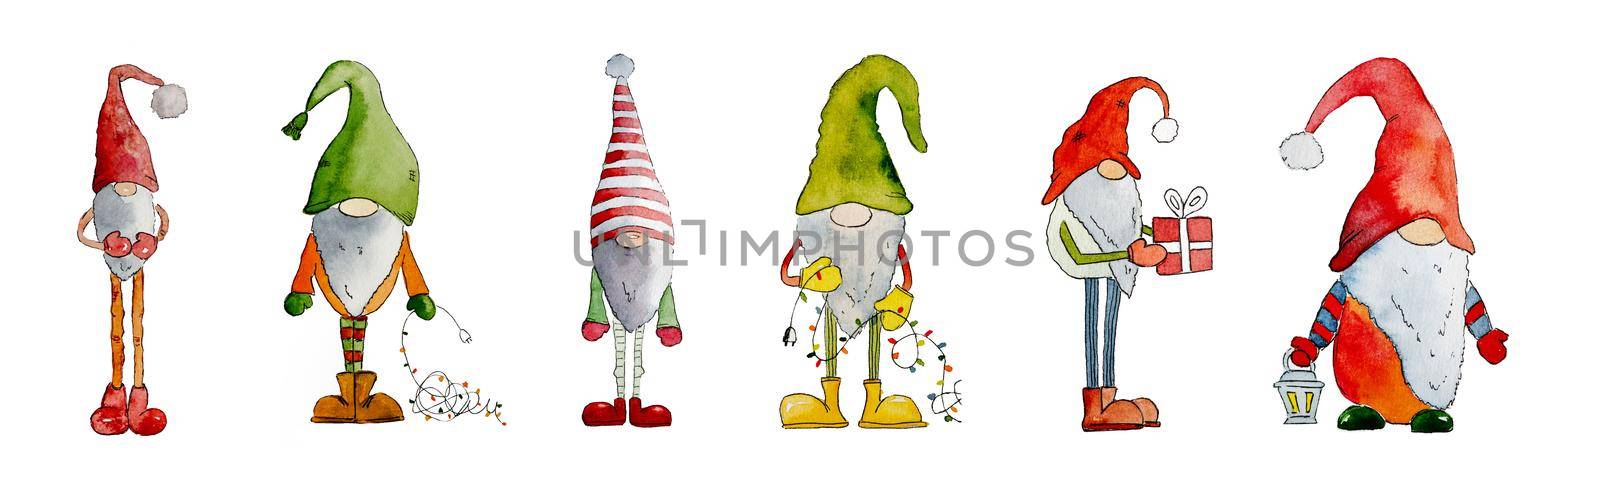 Christmas card with cute dwarfs, Santa Claus helpers, painted with watercolor and isolated on white background. New Year festive art with cartoon character elfs drawn with aquarelle